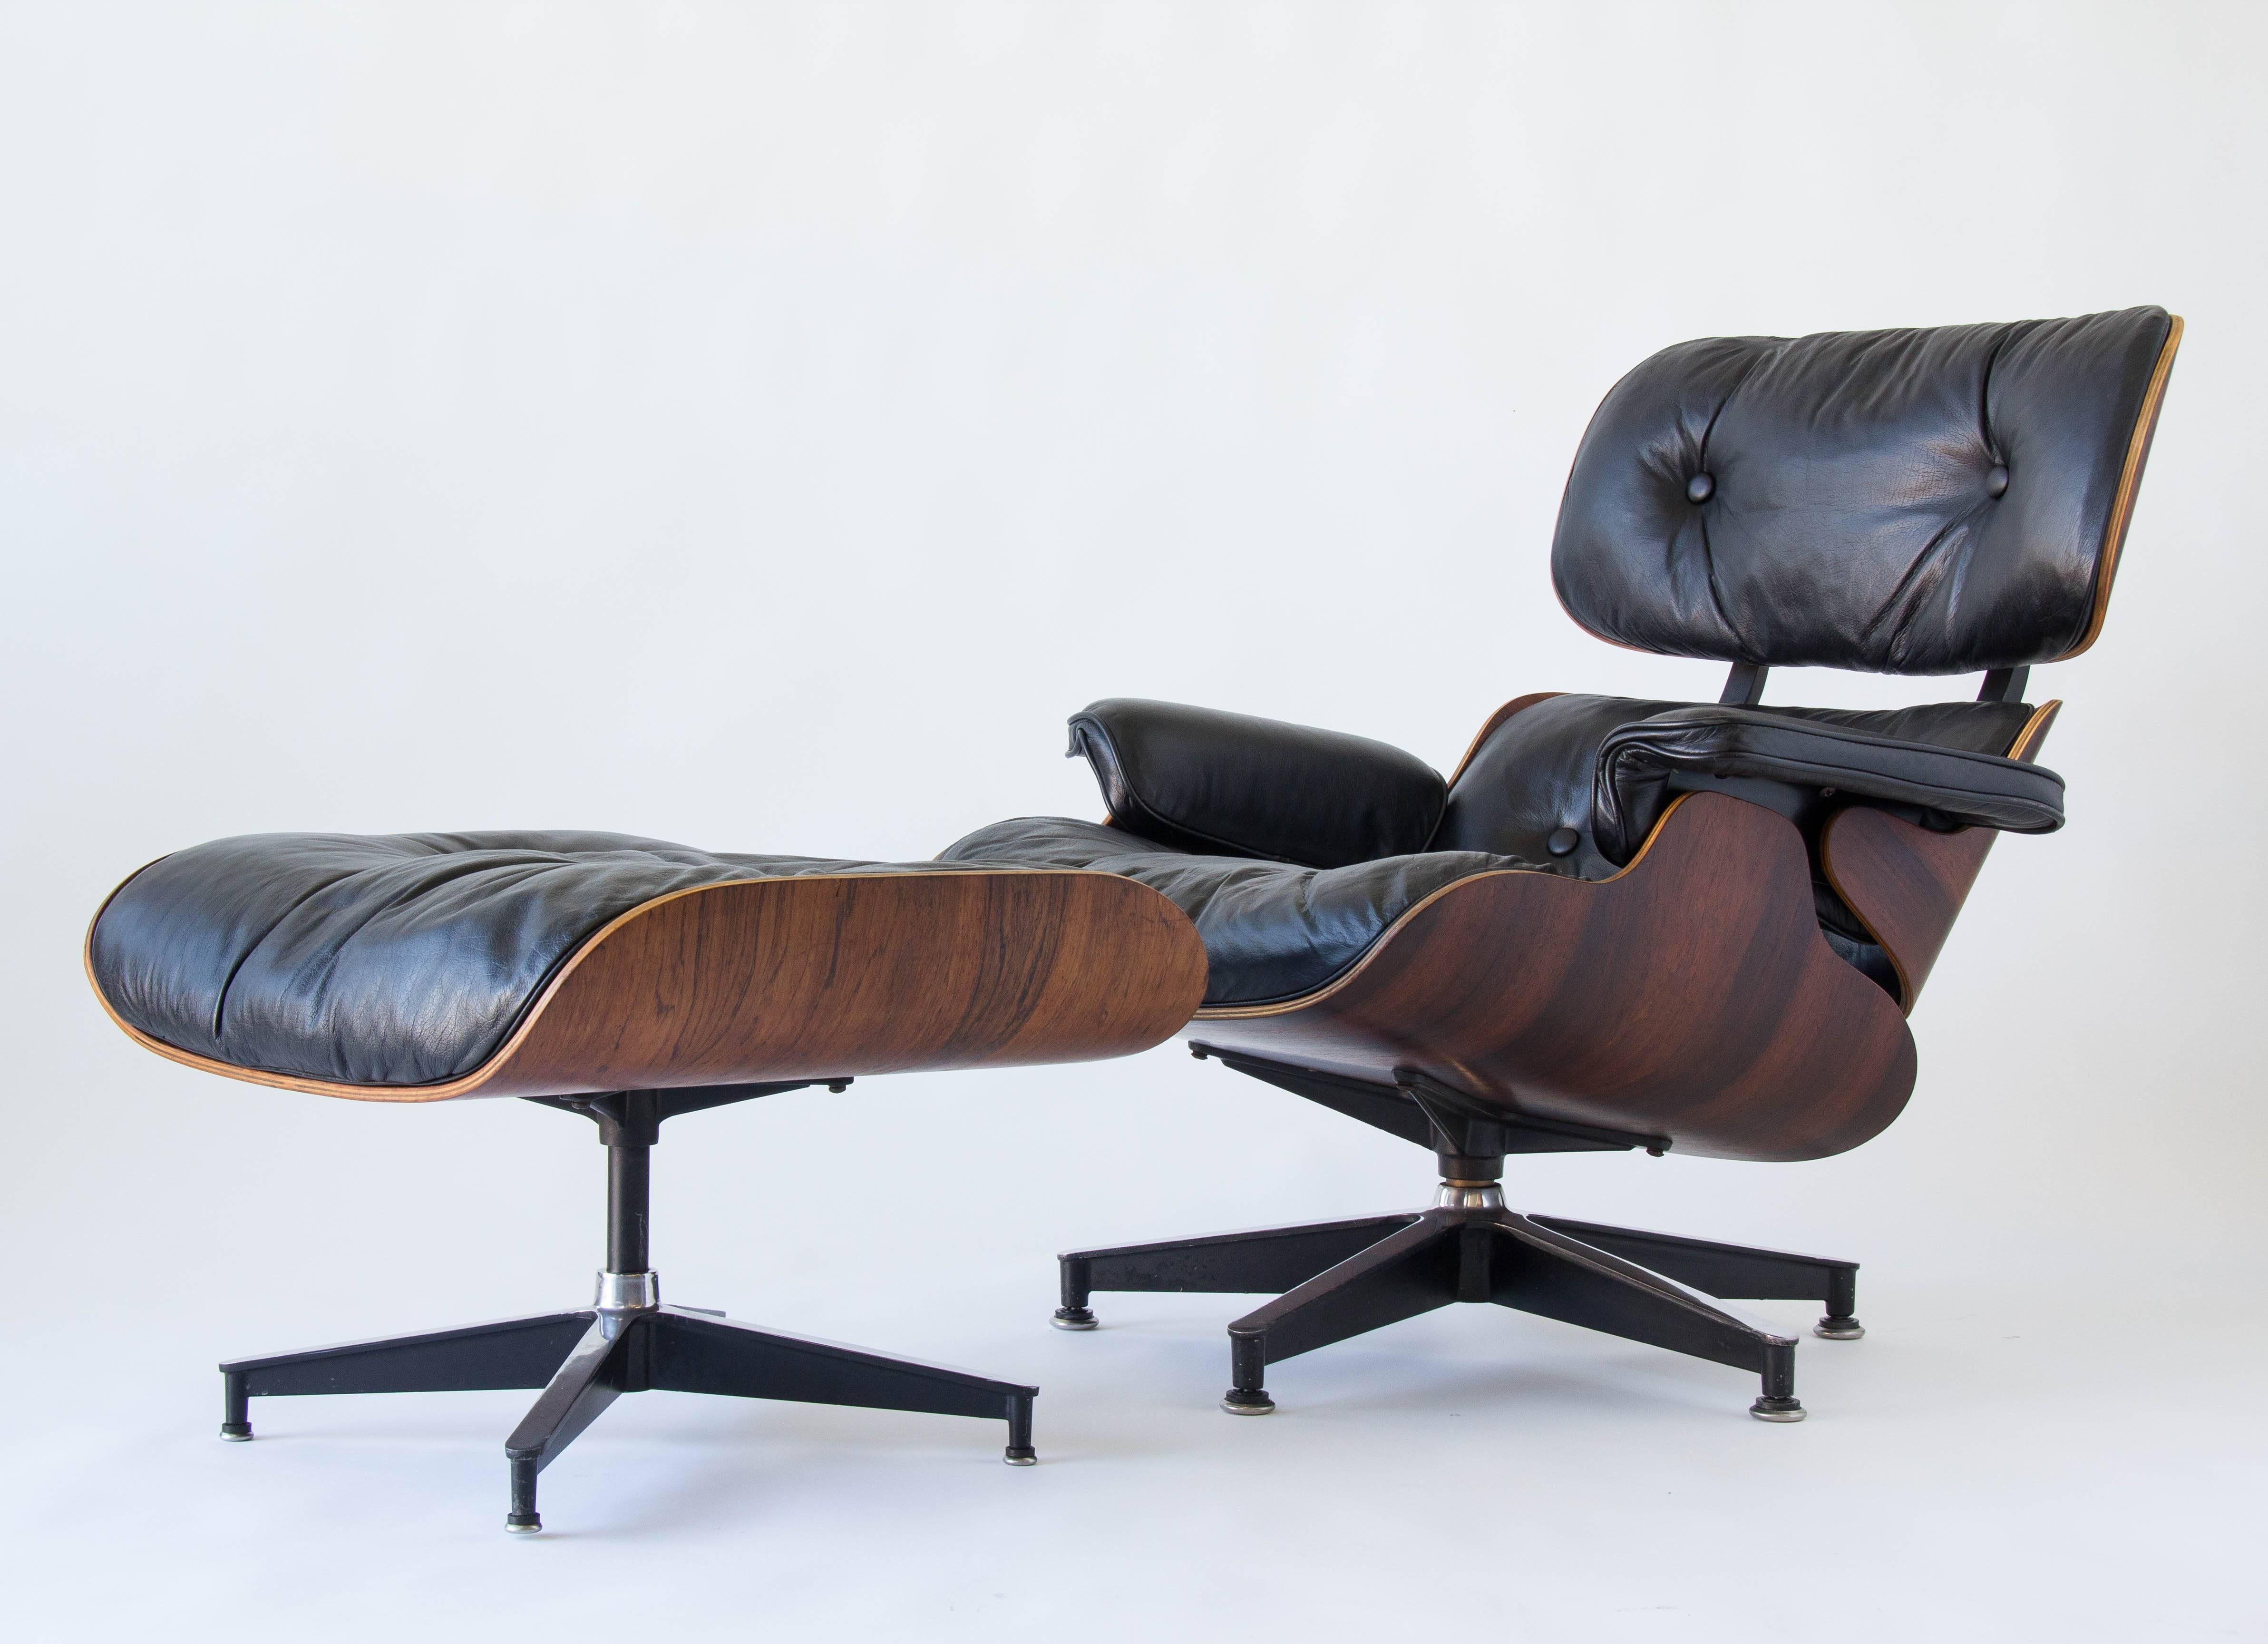 A 1960s edition of the iconic 670/671 lounge chair by Ray and Charles Eames for Herman Miller. This version has down filled cushions and round steel upholstery clips. The set is in vintage condition with the original black leather upholstery and